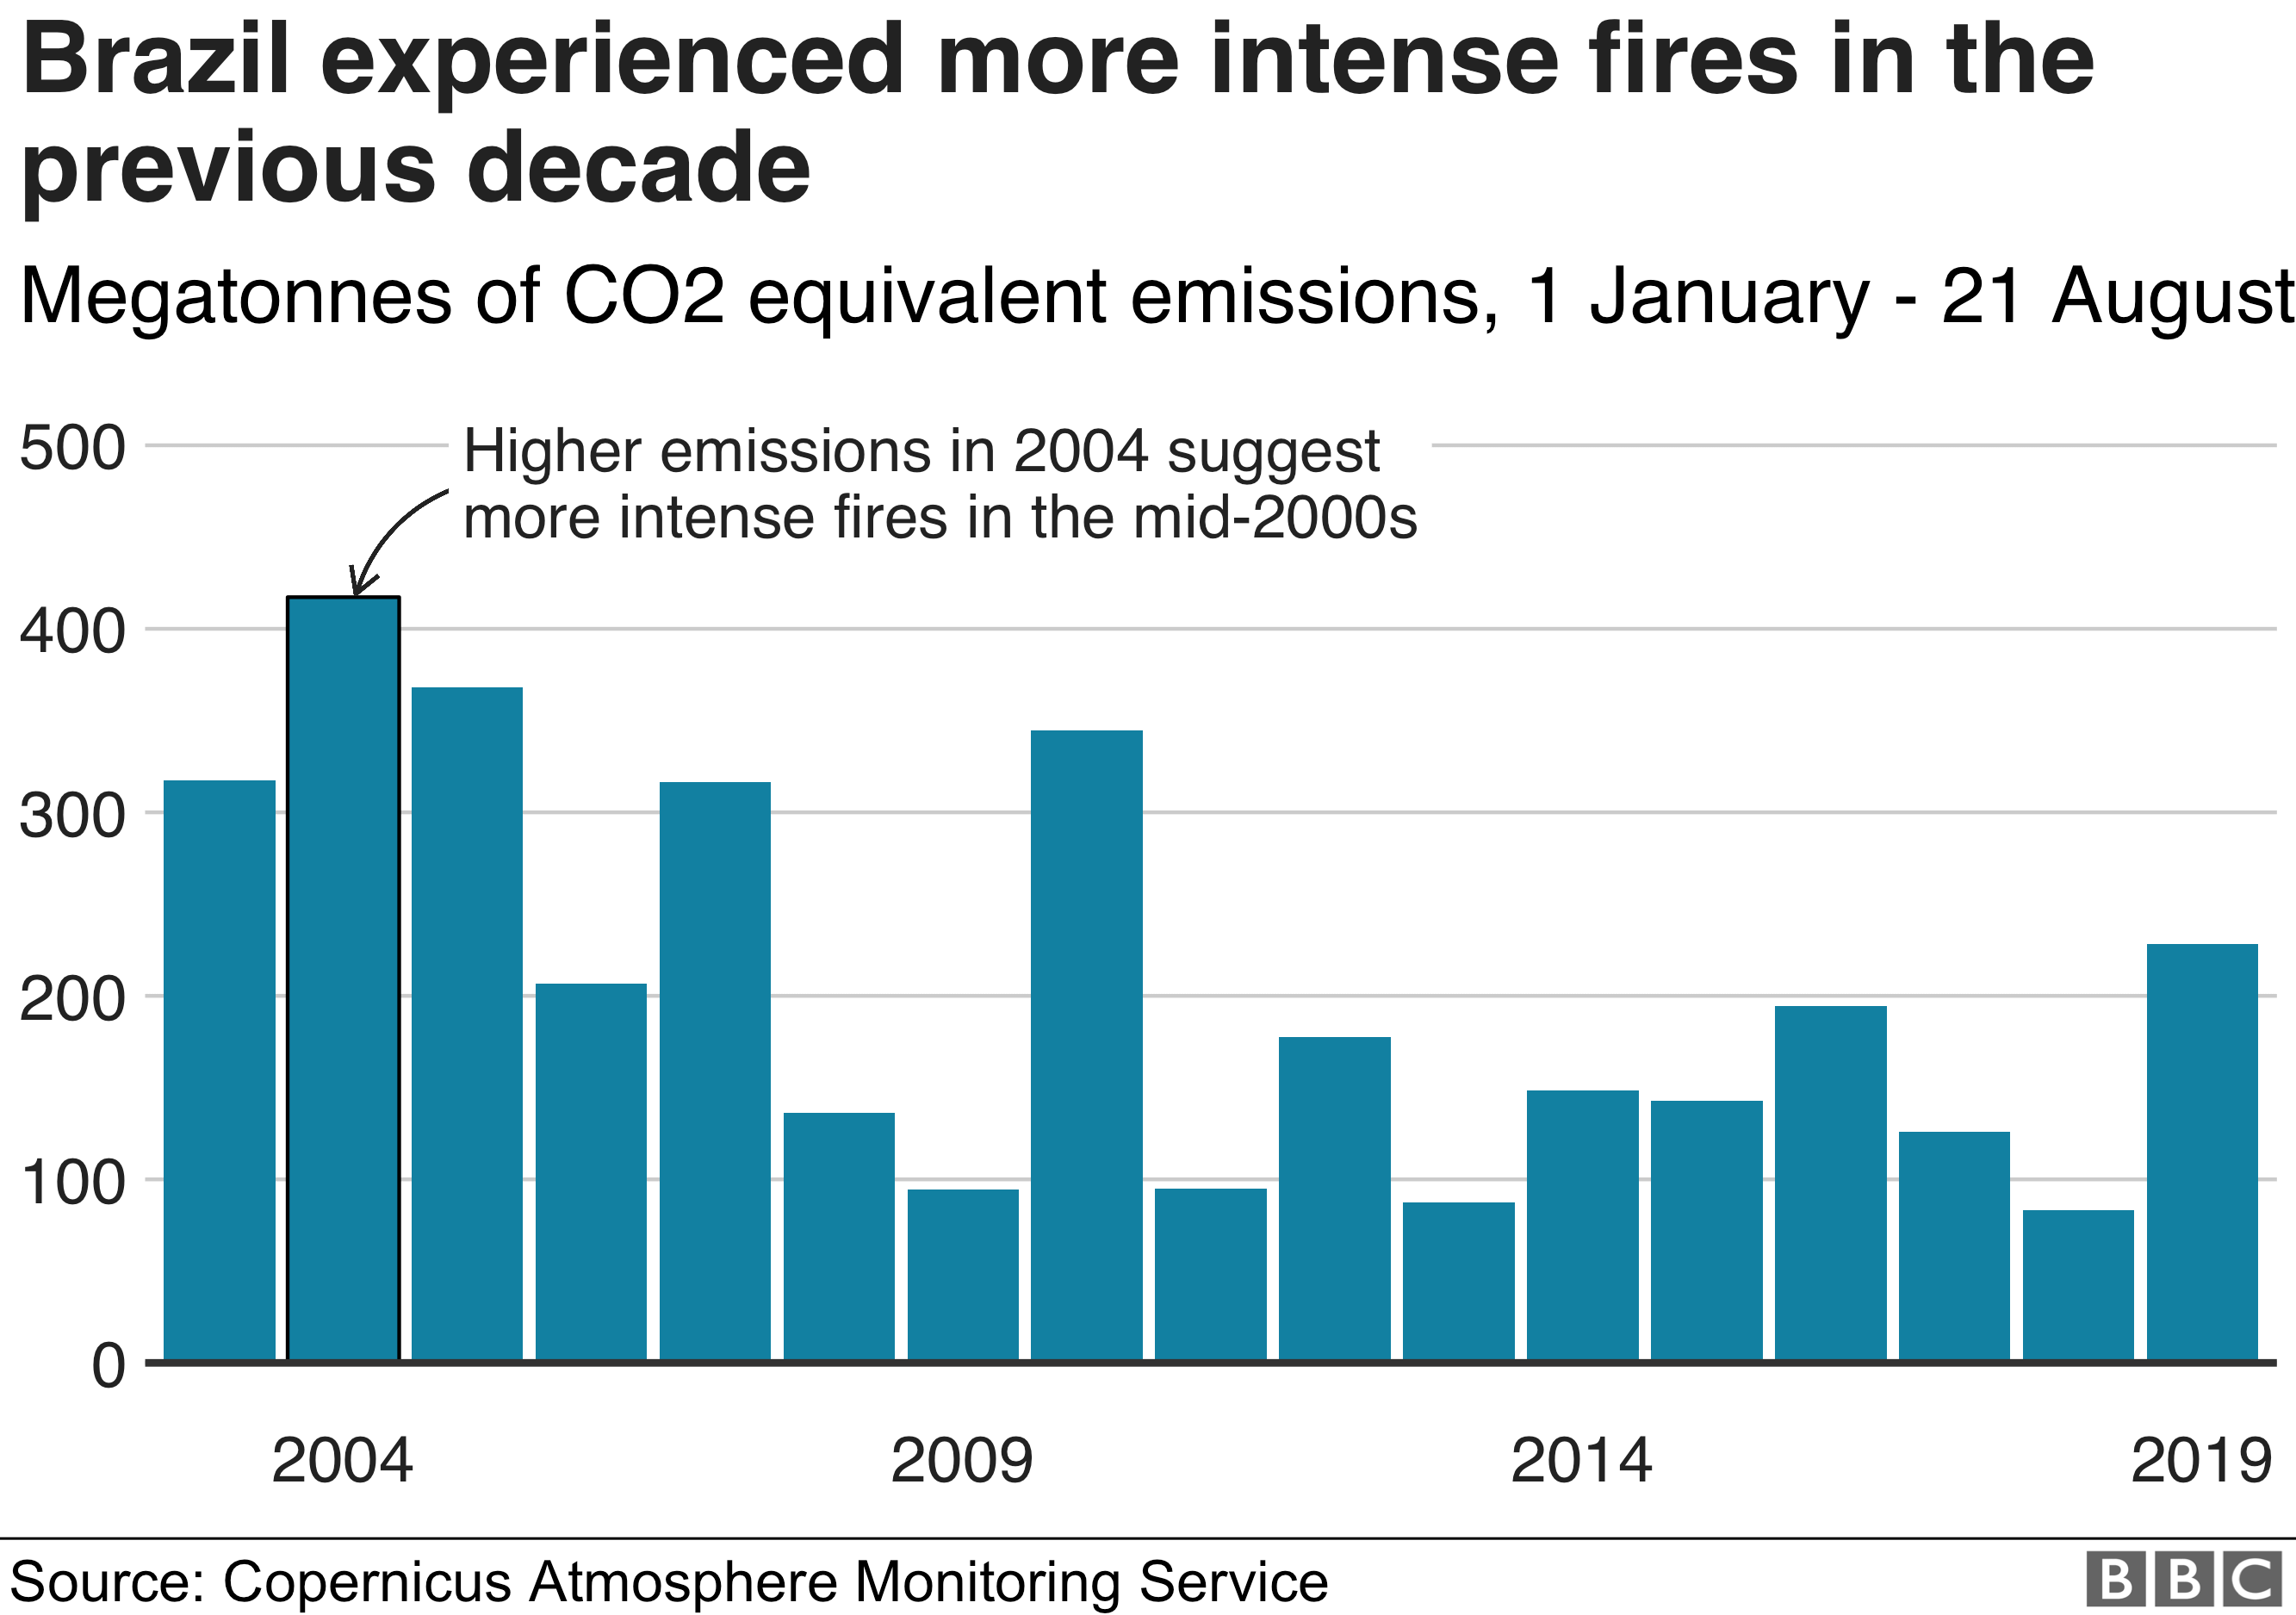 Chart showing the total CO2 equivalent emissions year on year in Brazil, showing how Brazil experienced more intense fires in the mid-2000s